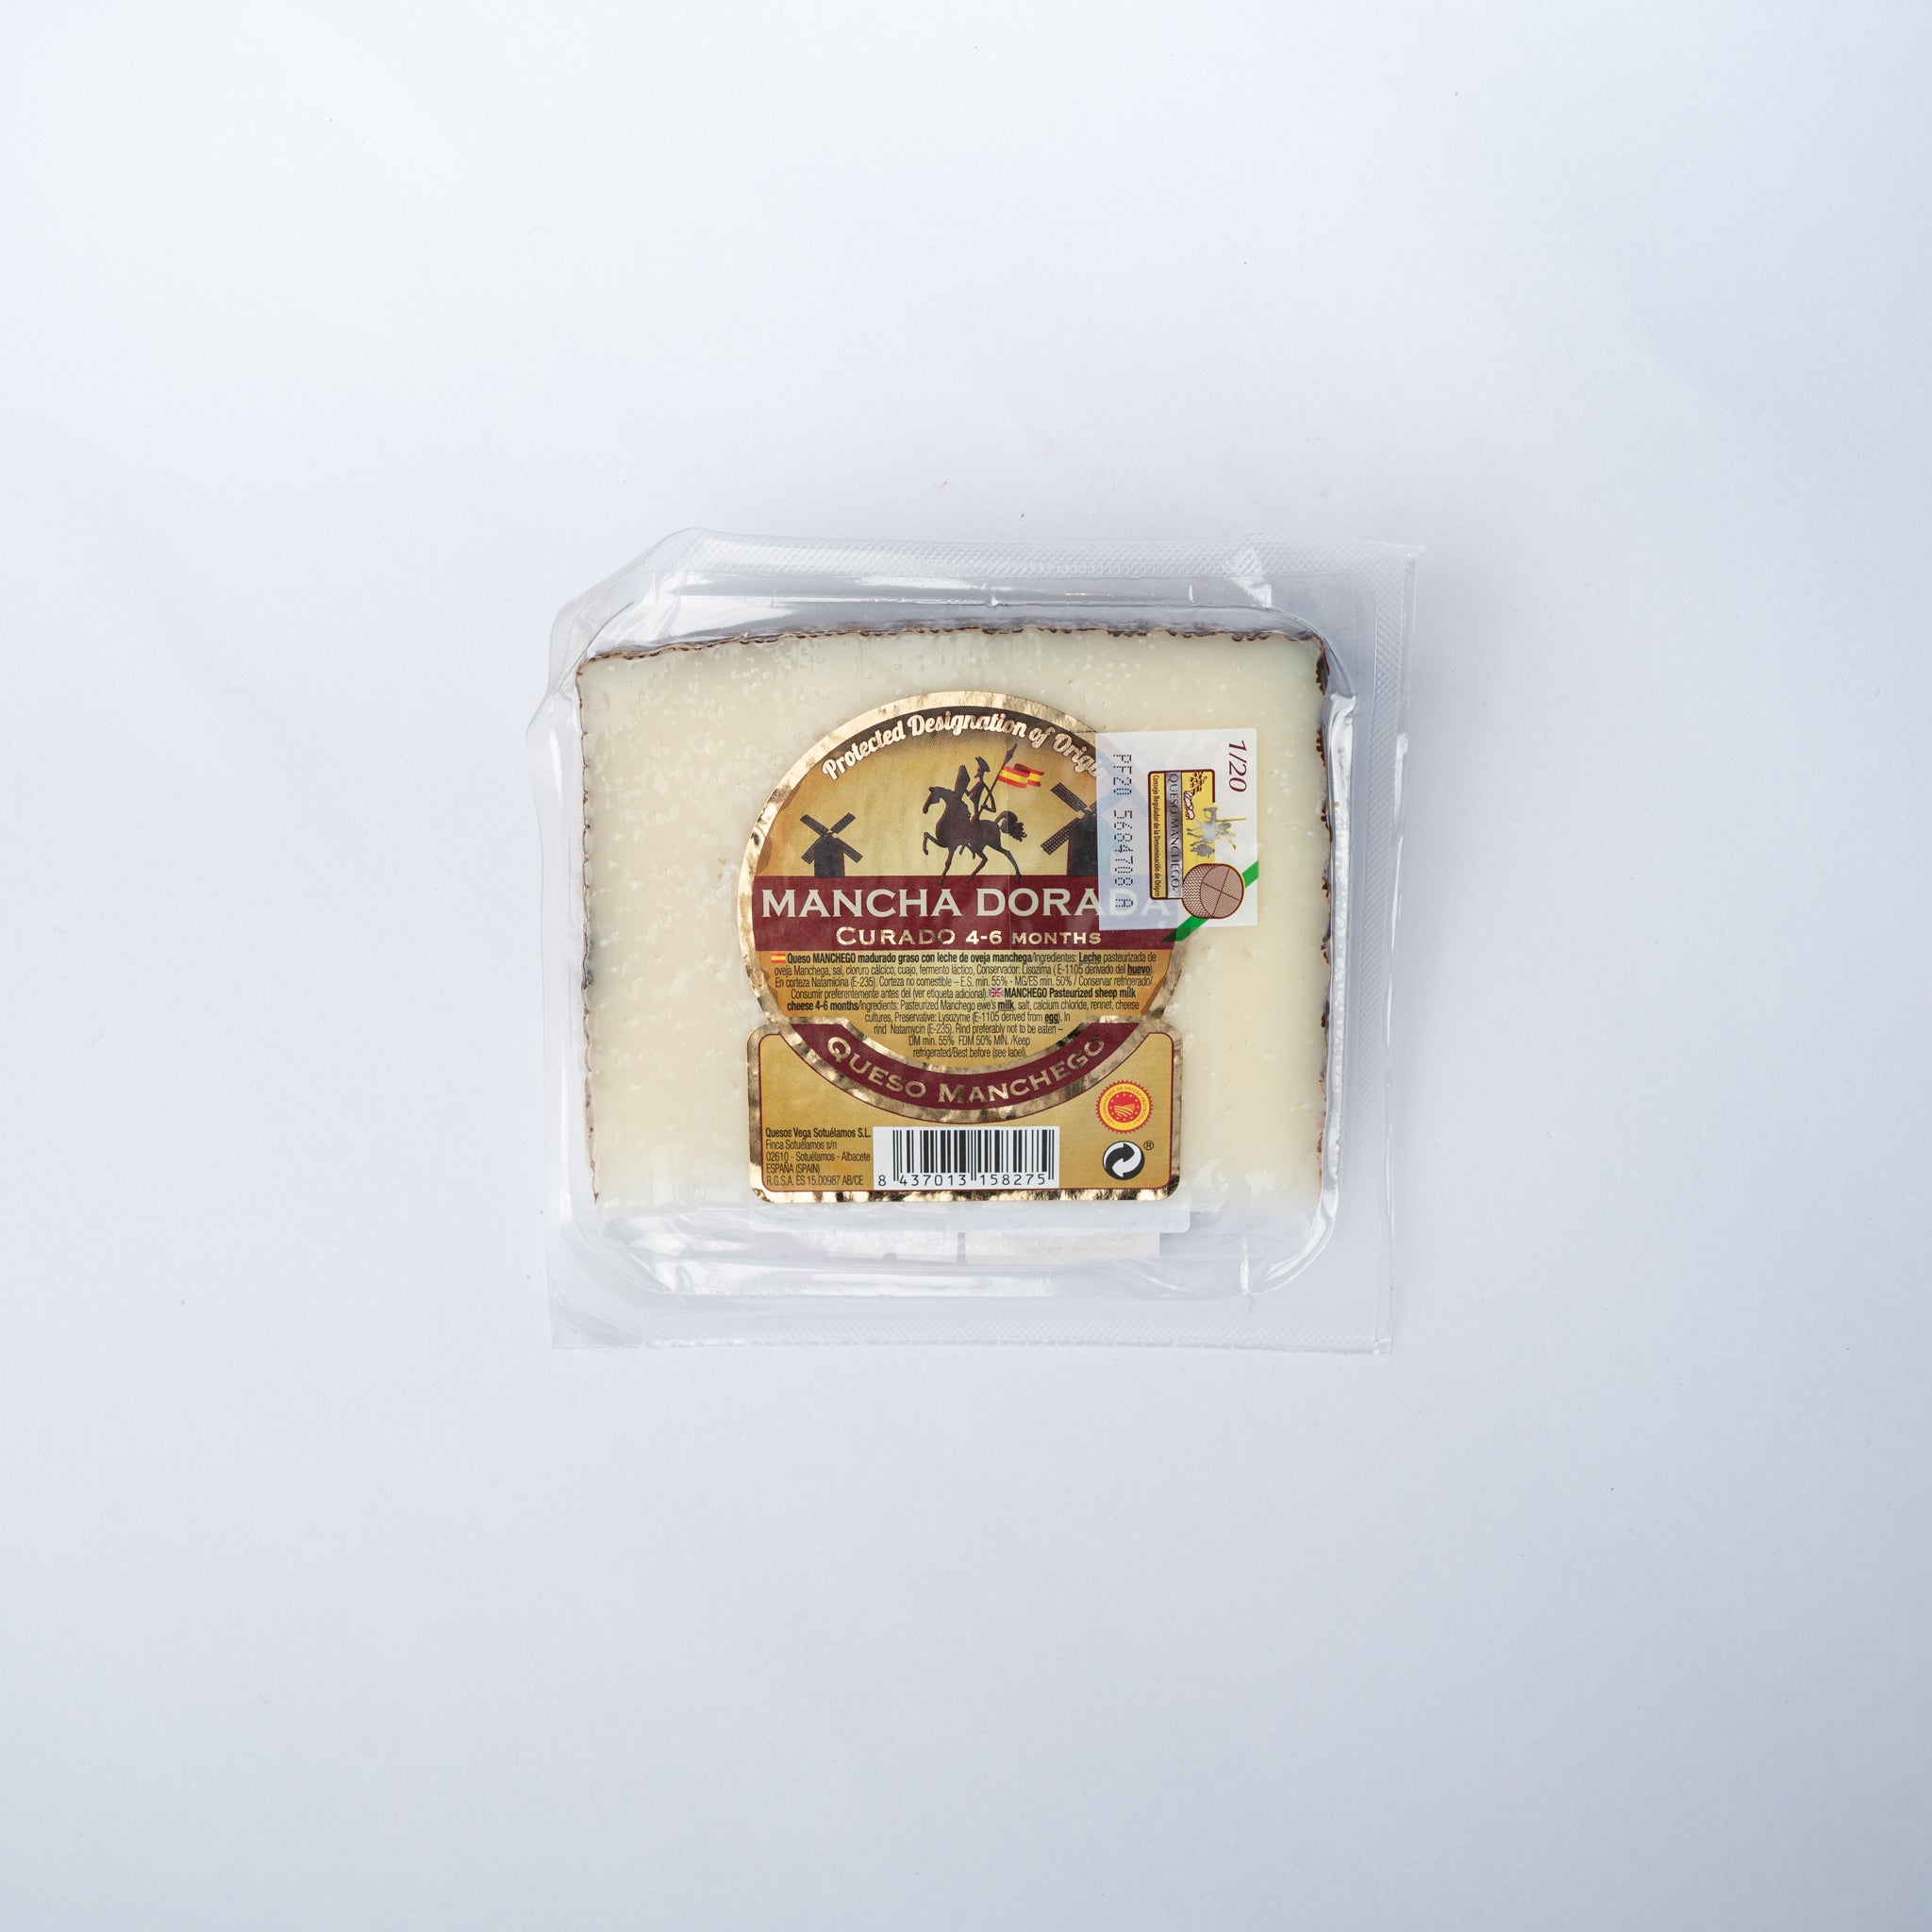 A 150g wedge of Vega Mancha Manchego cheese in shrink wrap.